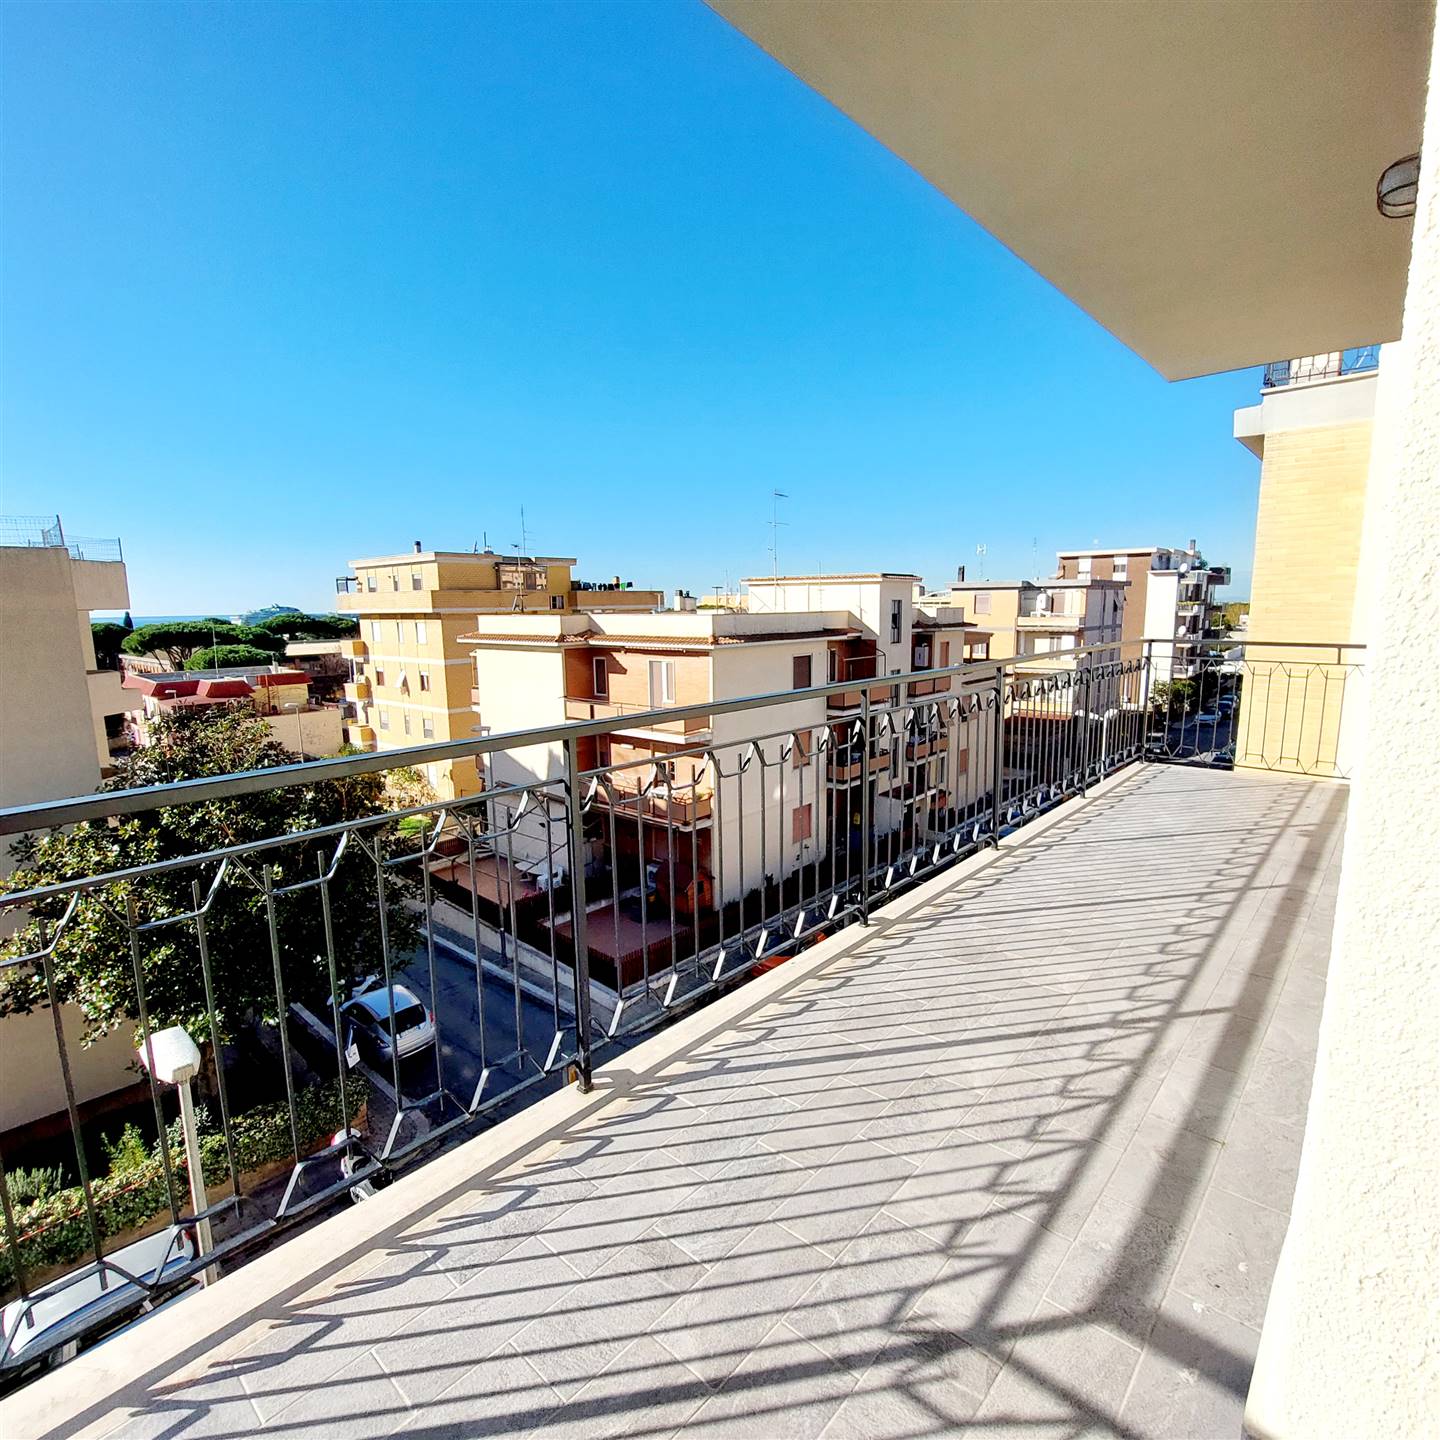 CAPPUCCINI, CIVITAVECCHIA, Apartment for sale of 79 Sq. mt., Habitable, Heating Individual heating system, Energetic class: G, Epi: 175 kwh/m2 year, 